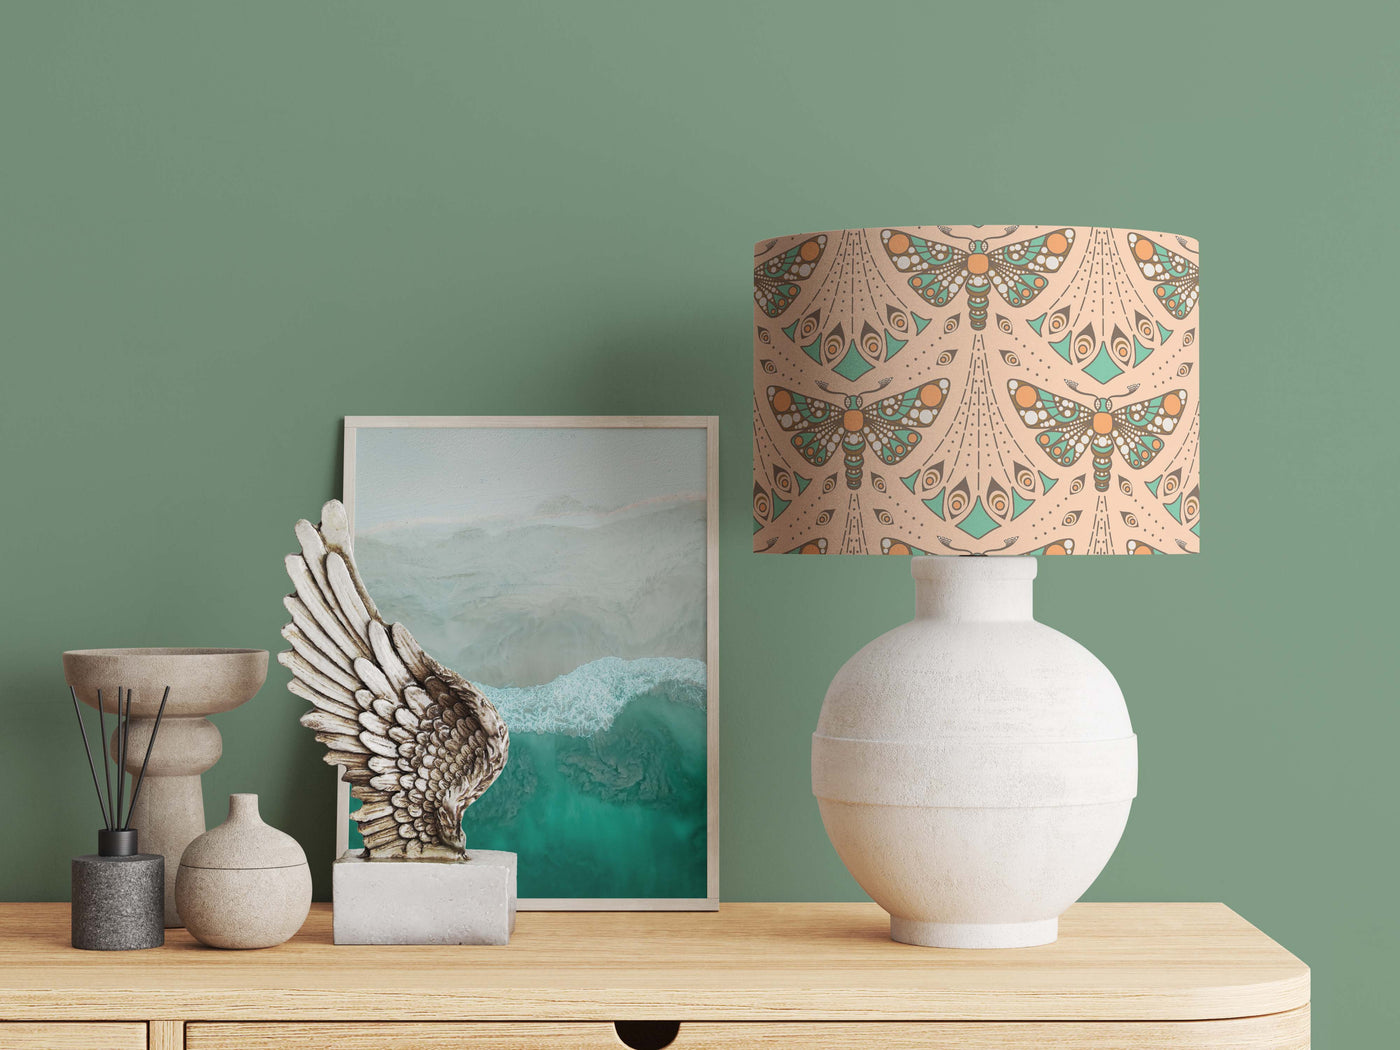 Sand Art Nouveau Moth Lampshade with Mirror Gold Lining on green wall background